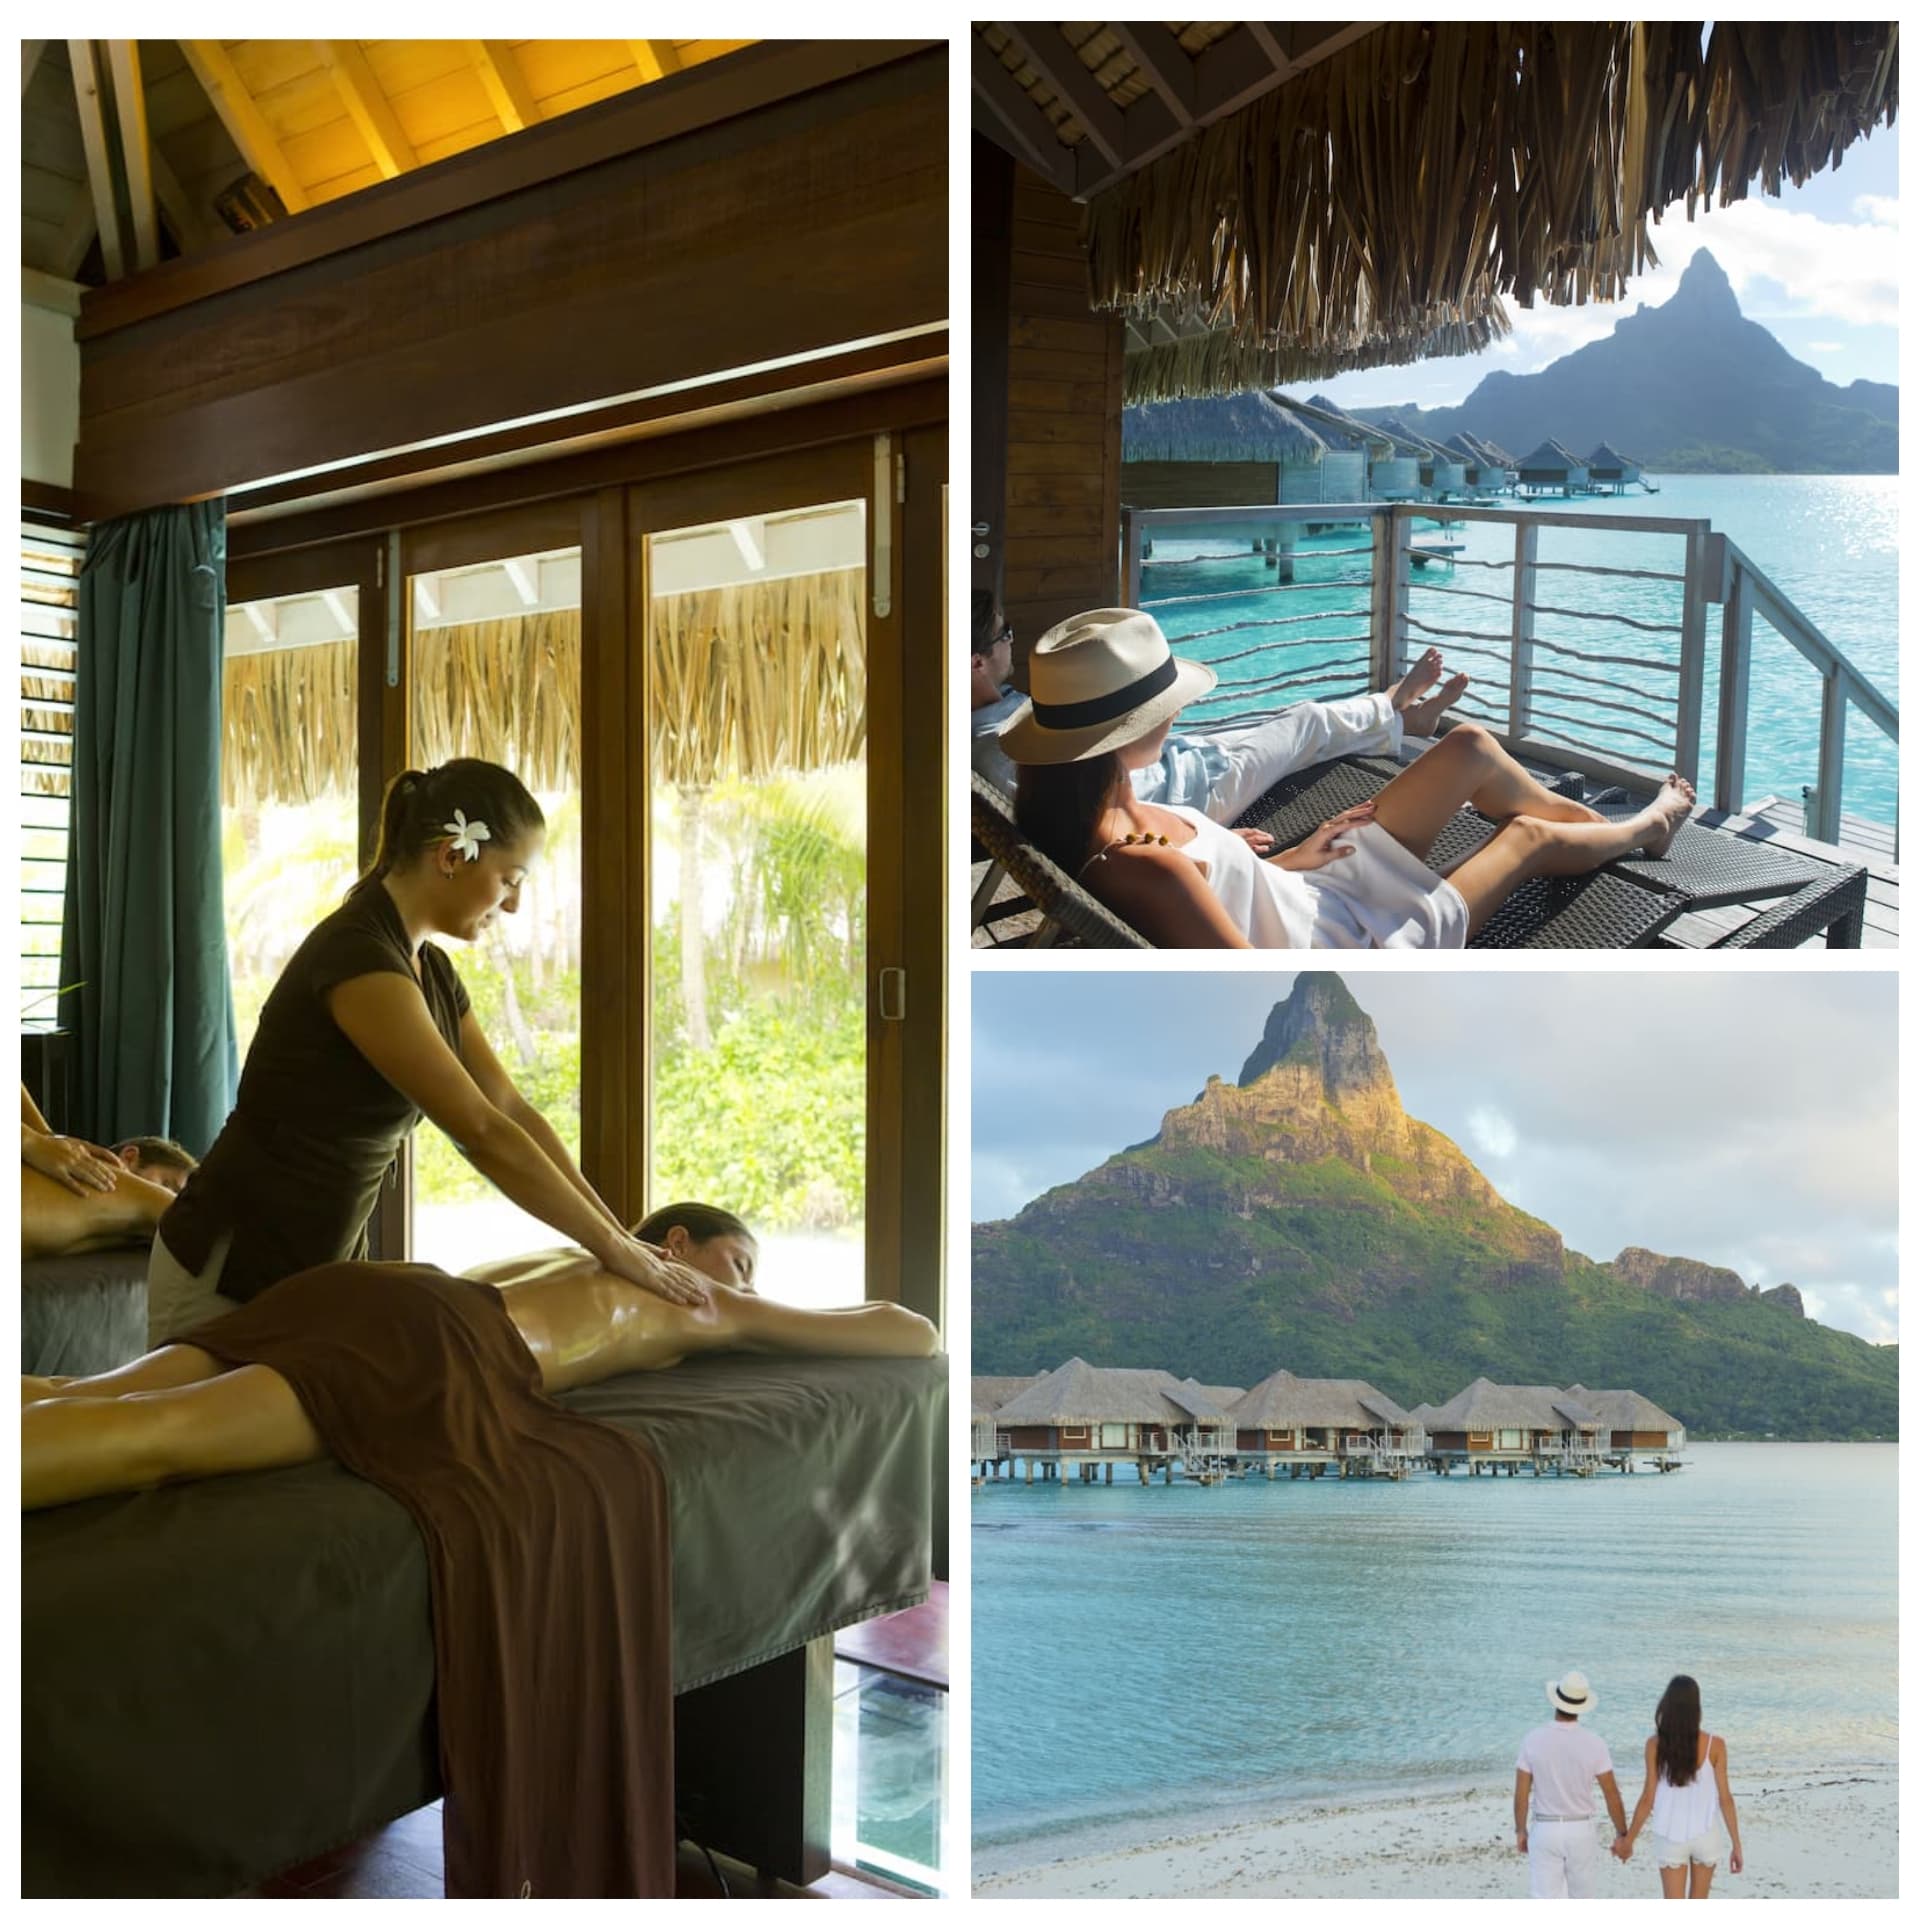 Collage of Intercontinental Bora Bora Resort with a couple receiving a massage over glass floor, couple on the deck of overwater bungalow, and couple strolling on white sand beach with Mt. Otemanu in the background.